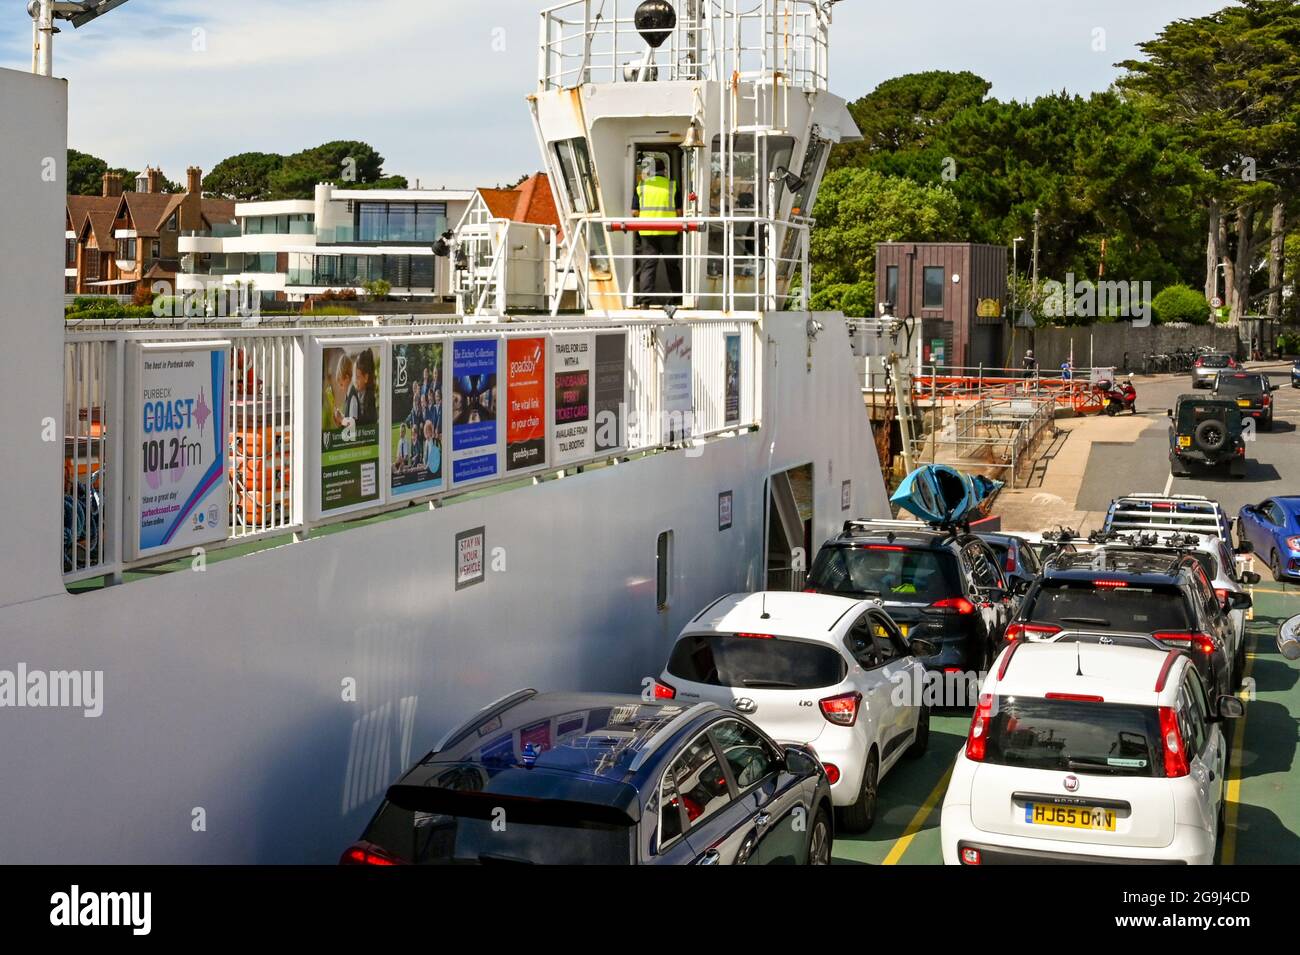 Poole, Dorset, England - June 2021: Cars waiting to drive off the chain ferry which crosses the mouth of Poole harbour joining Poole with Swanage Stock Photo